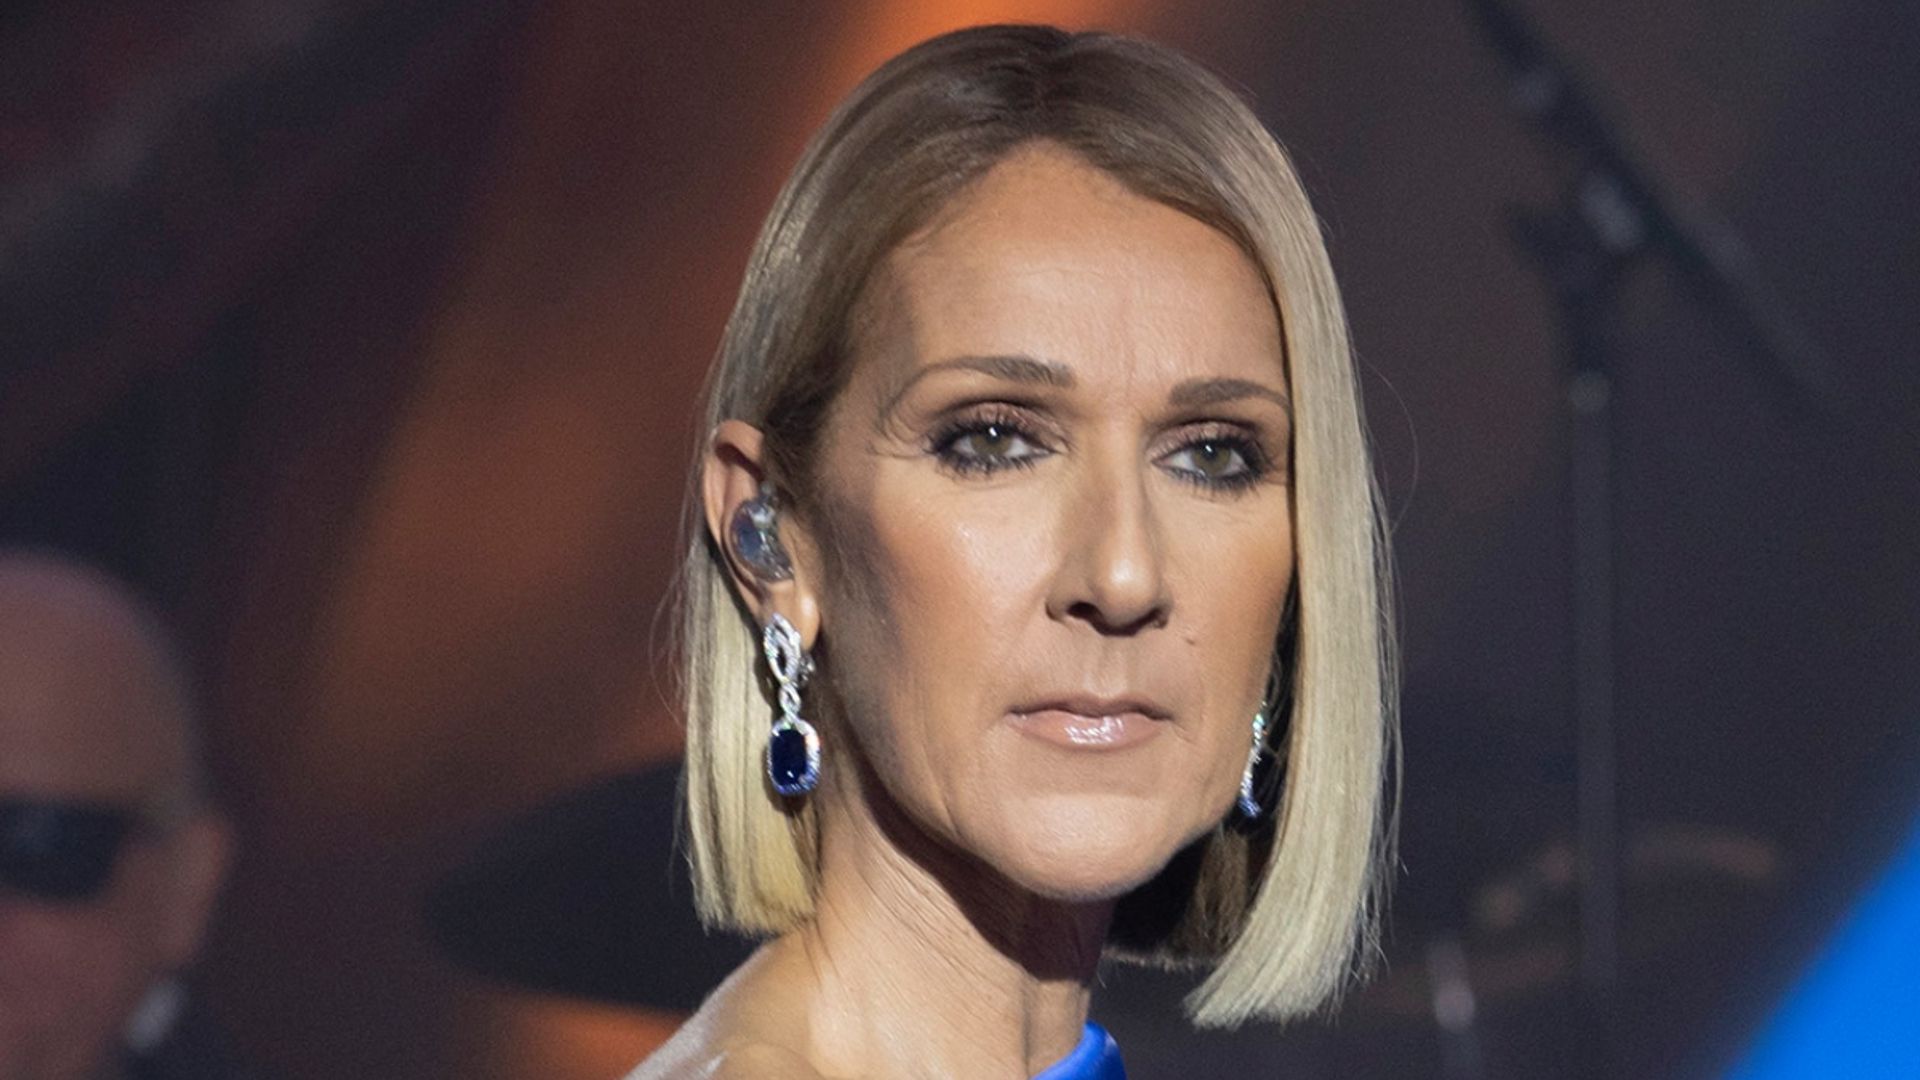 Celine Dion shares powerful message of support from home on International Women’s Day amid time of recovery